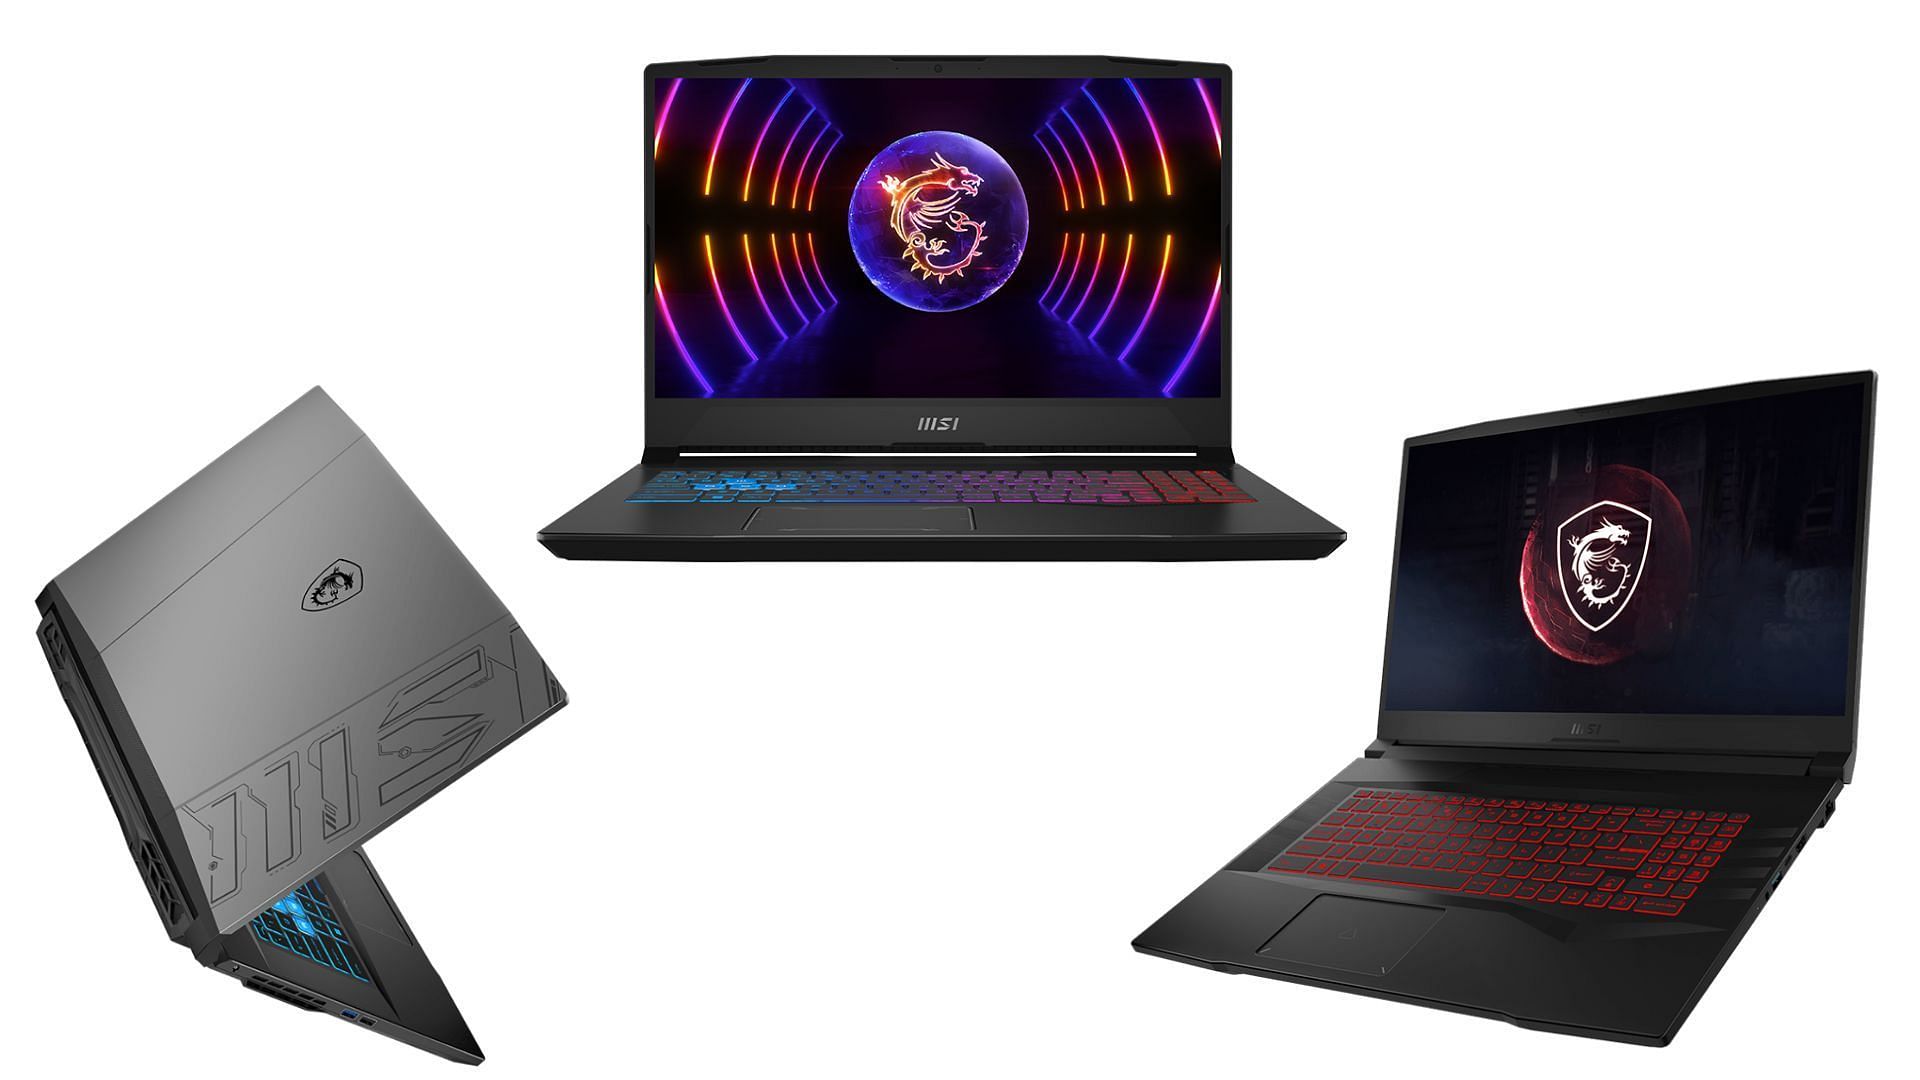 MSI laptops offer slightly better performance compared to the Asus ones (Image via MSI)